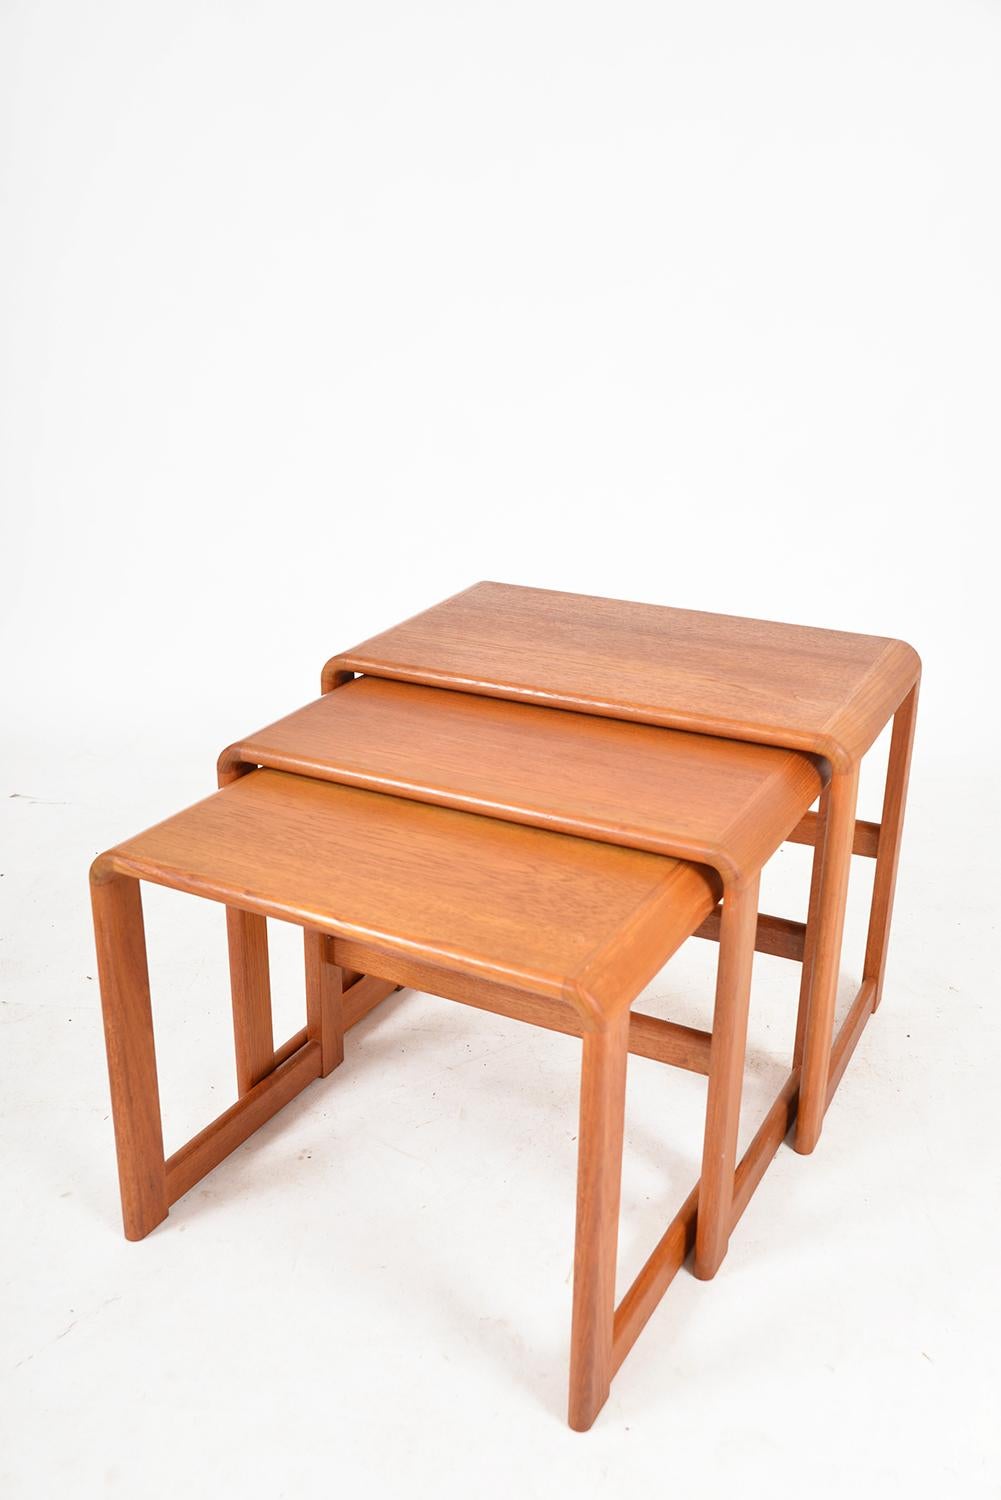 Midcentury Teak Nesting Occasional Tables by O'Donnell Design Irish 1970s Danish For Sale 12